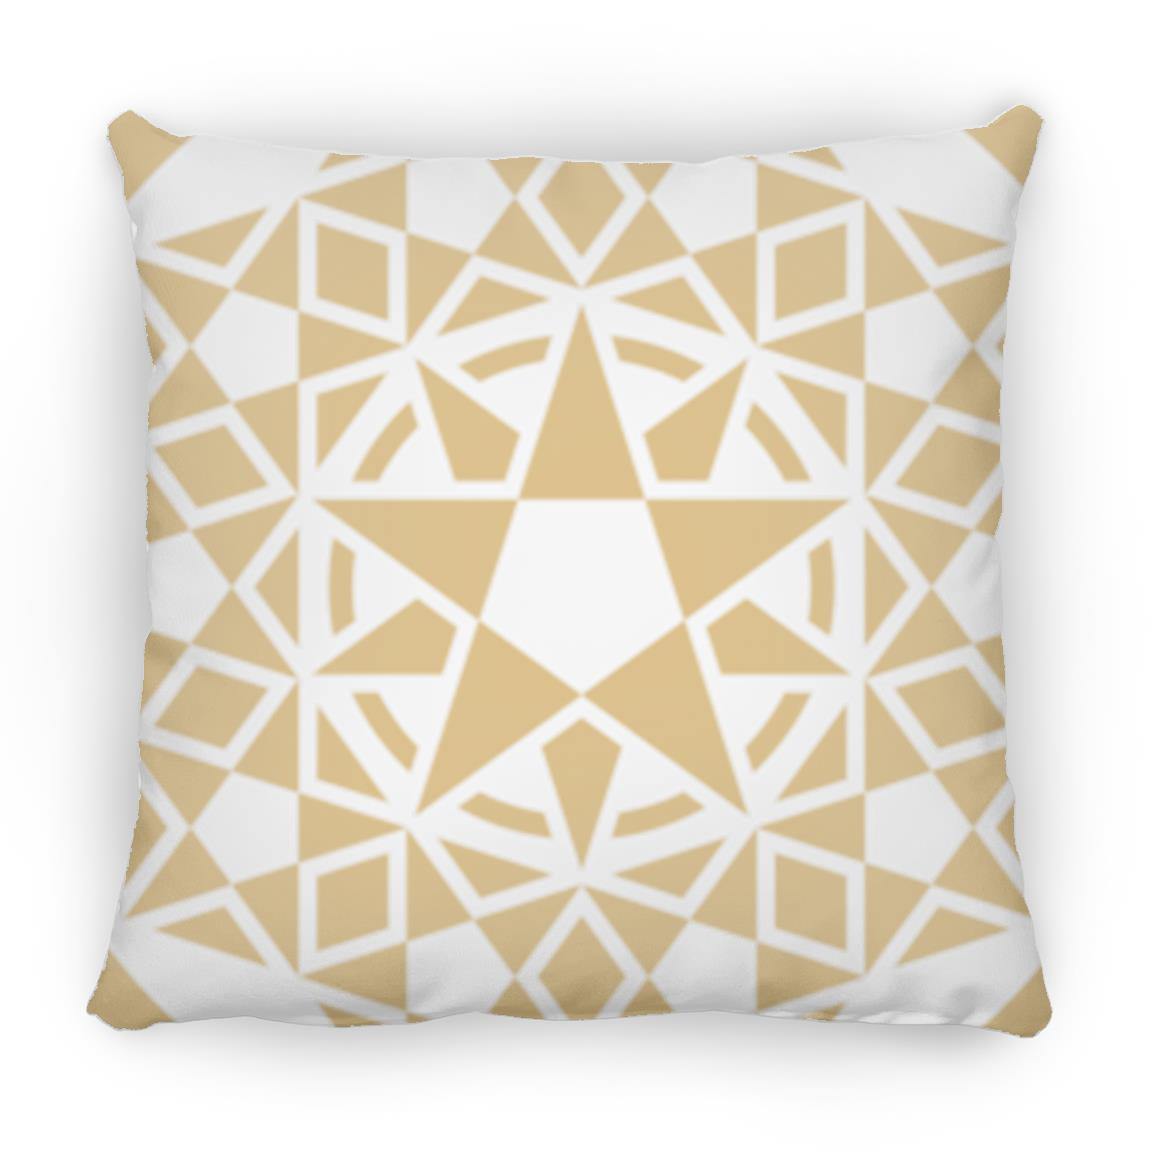 Crop Circle Pillow - Hackpen Hill - Shapes of Wisdom